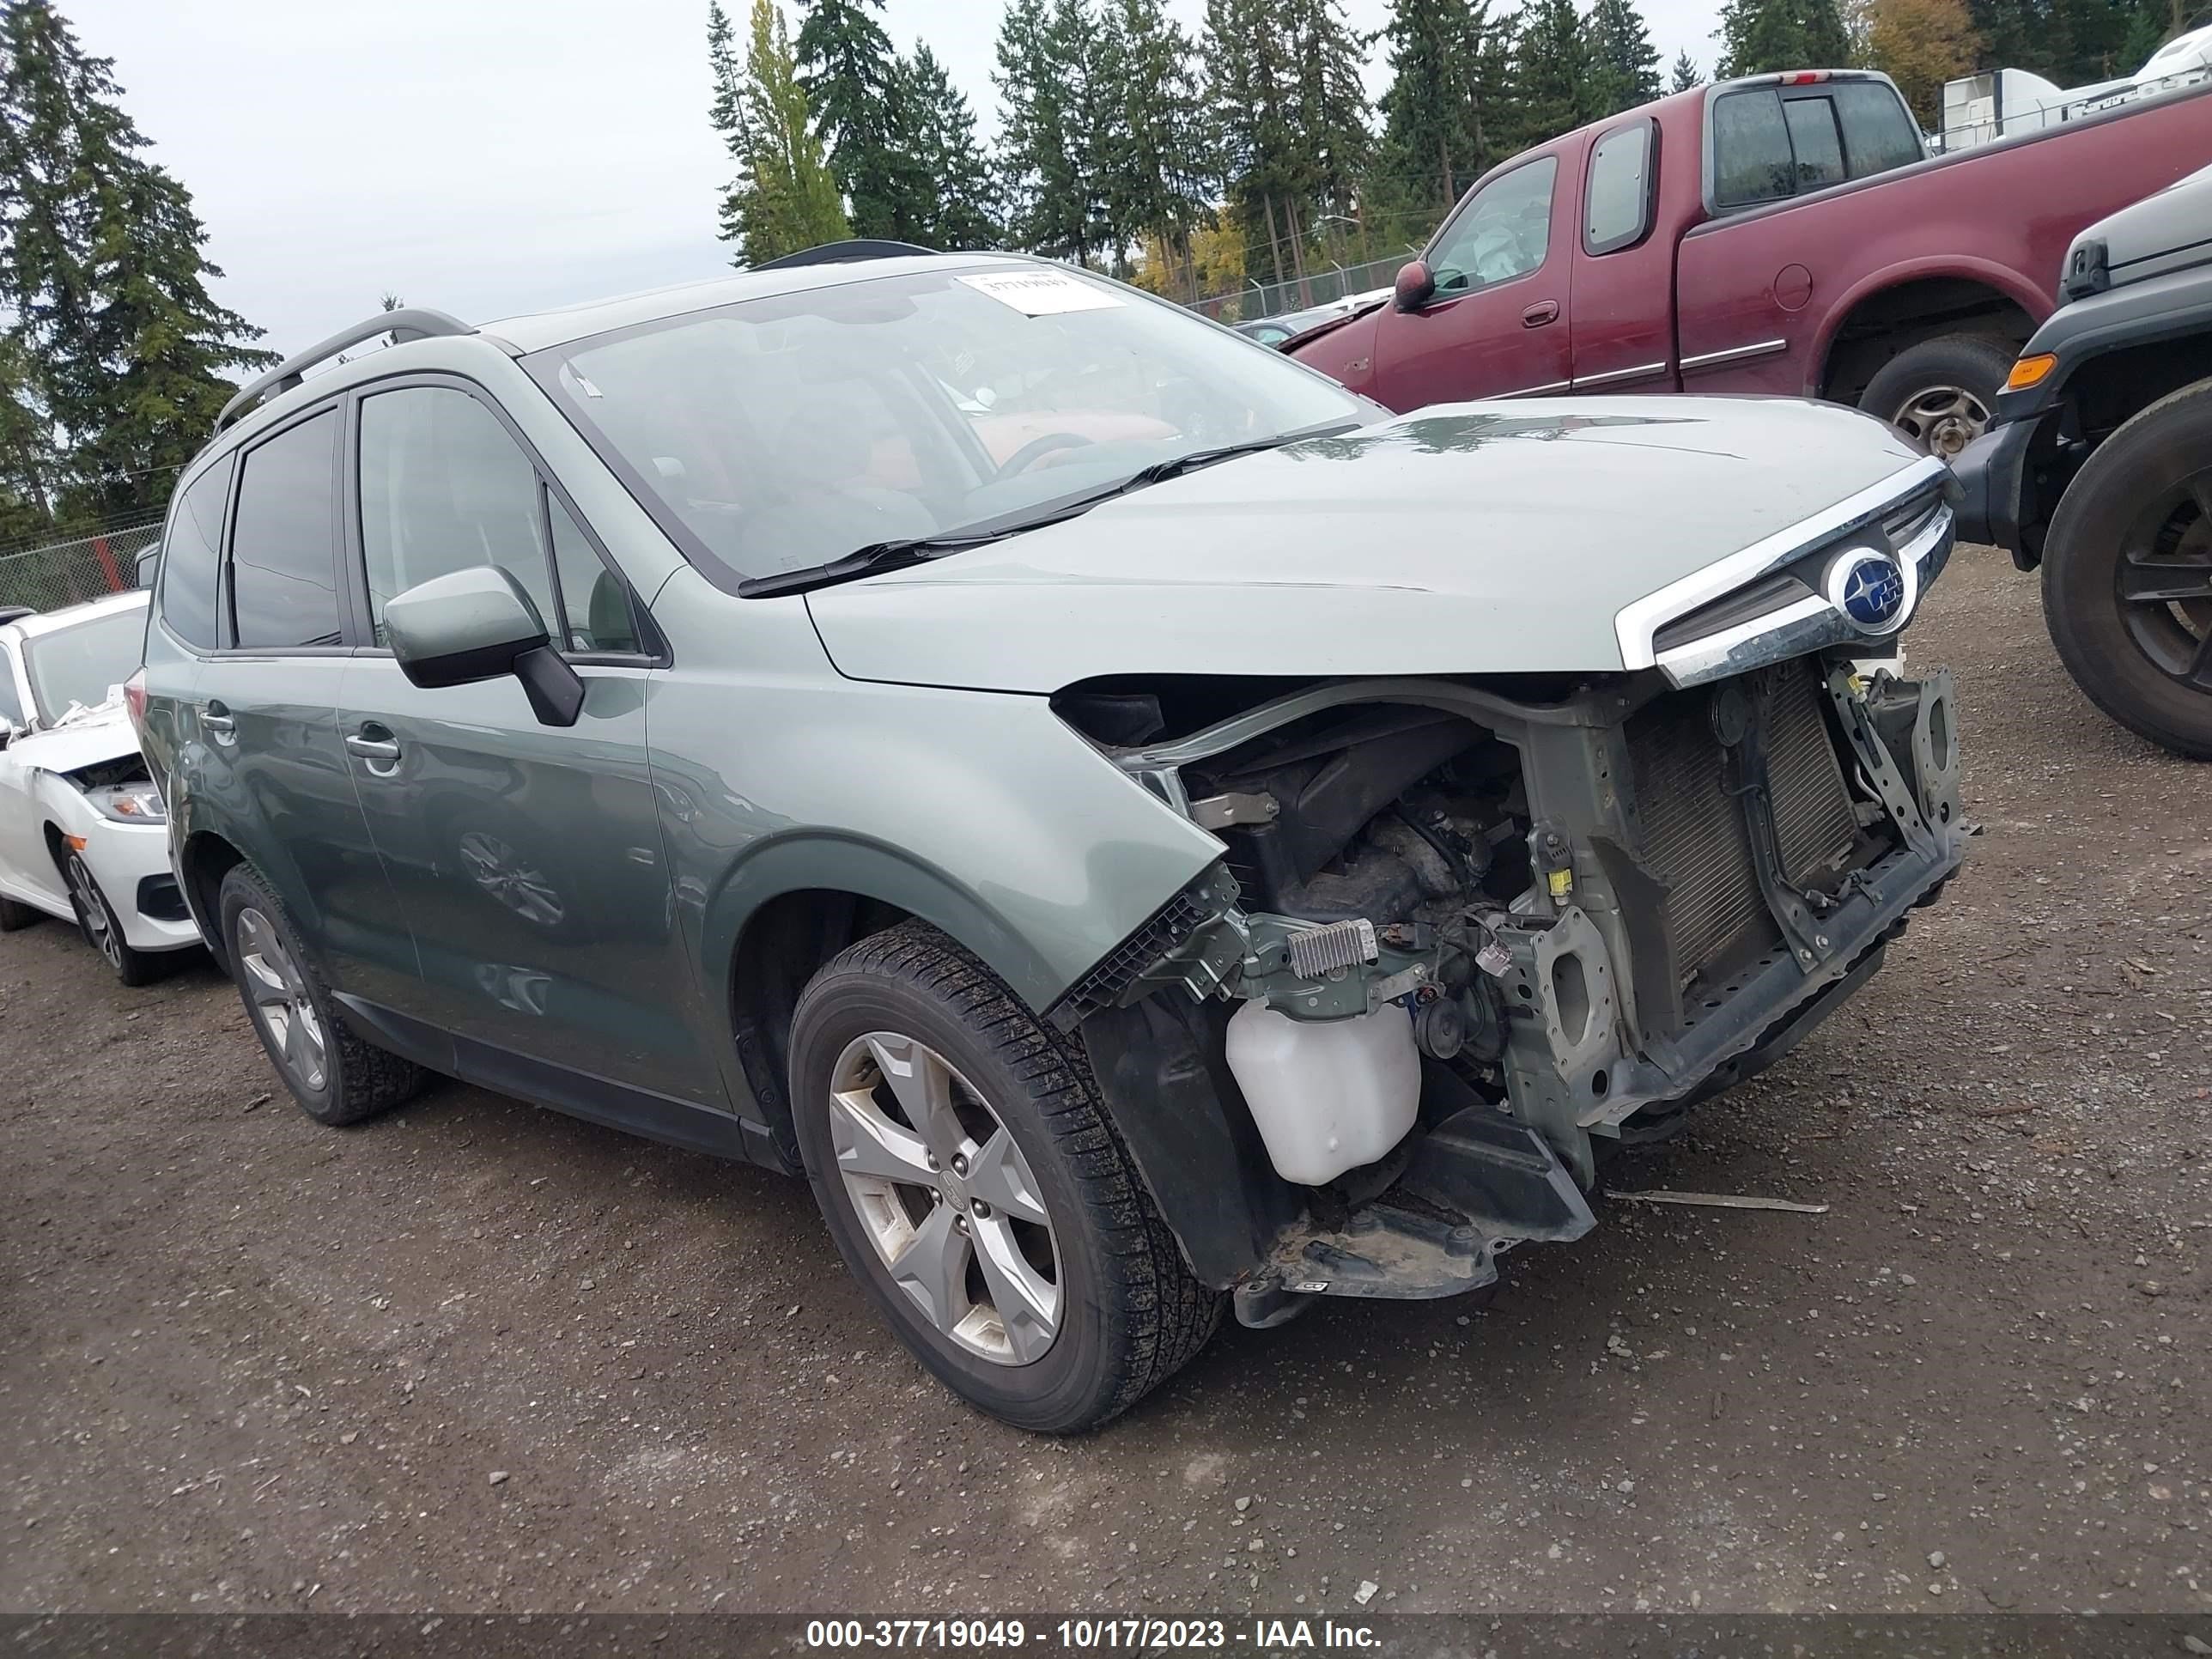 vin: JF2SJAFCXFH566742 JF2SJAFCXFH566742 2015 subaru forester 2500 for Sale in 98374, 15801 110Th Ave E, Puyallup, USA